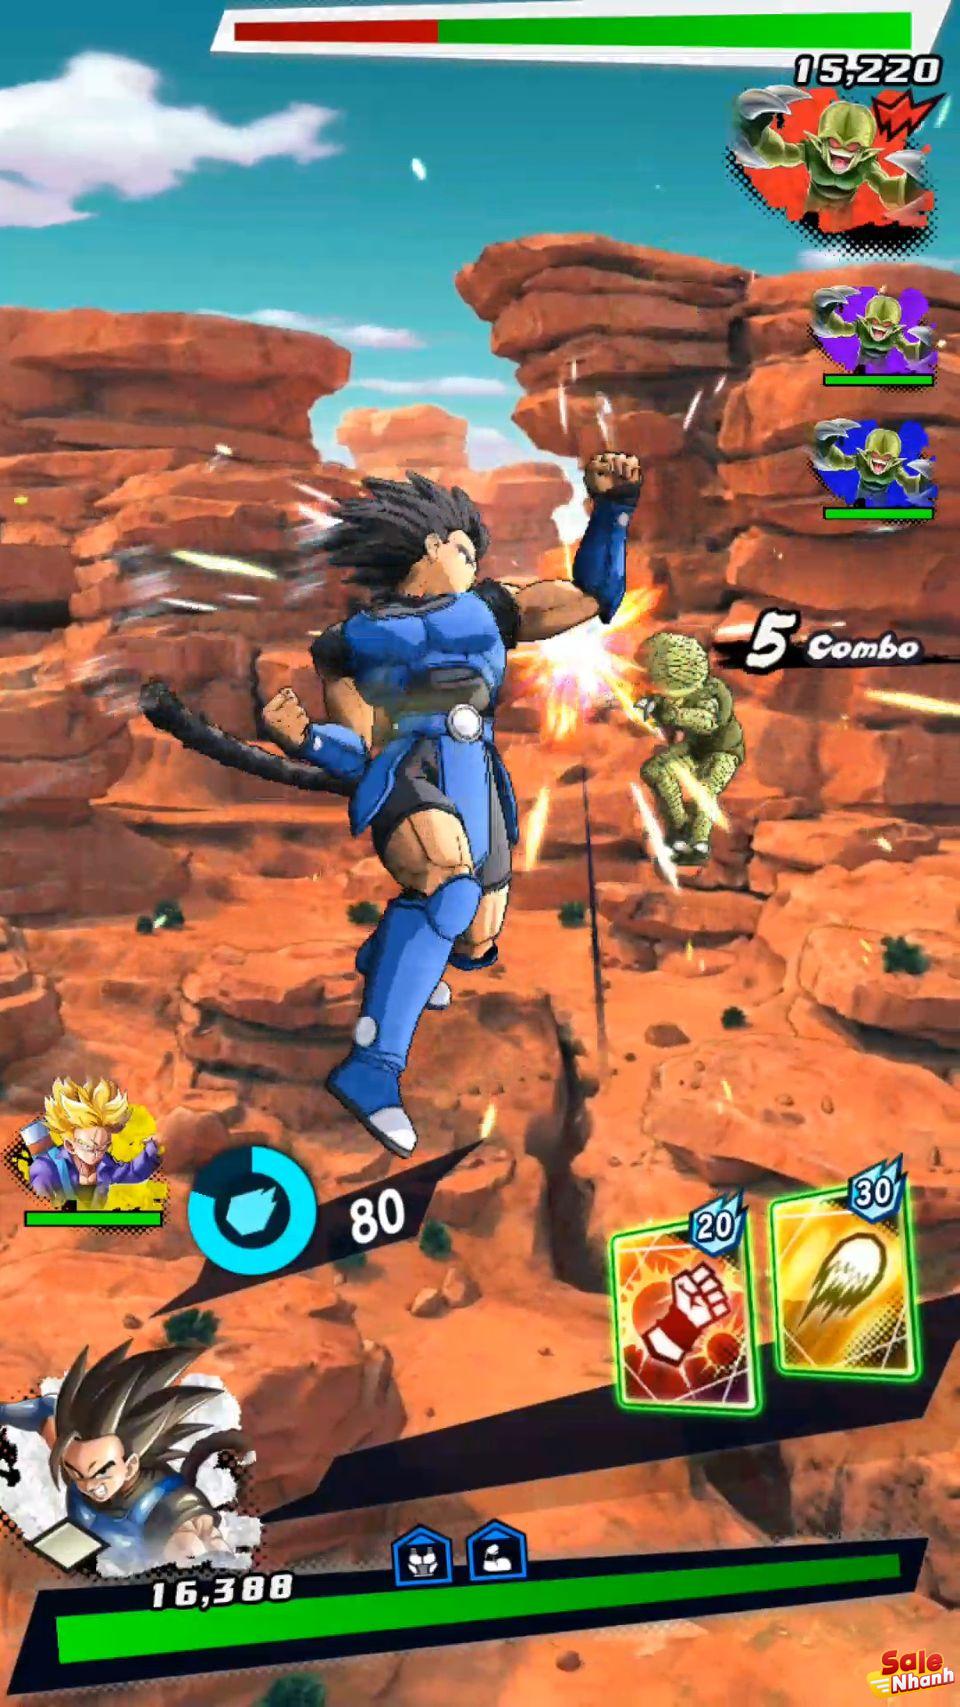 Gameplay of Dragon Ball Legends